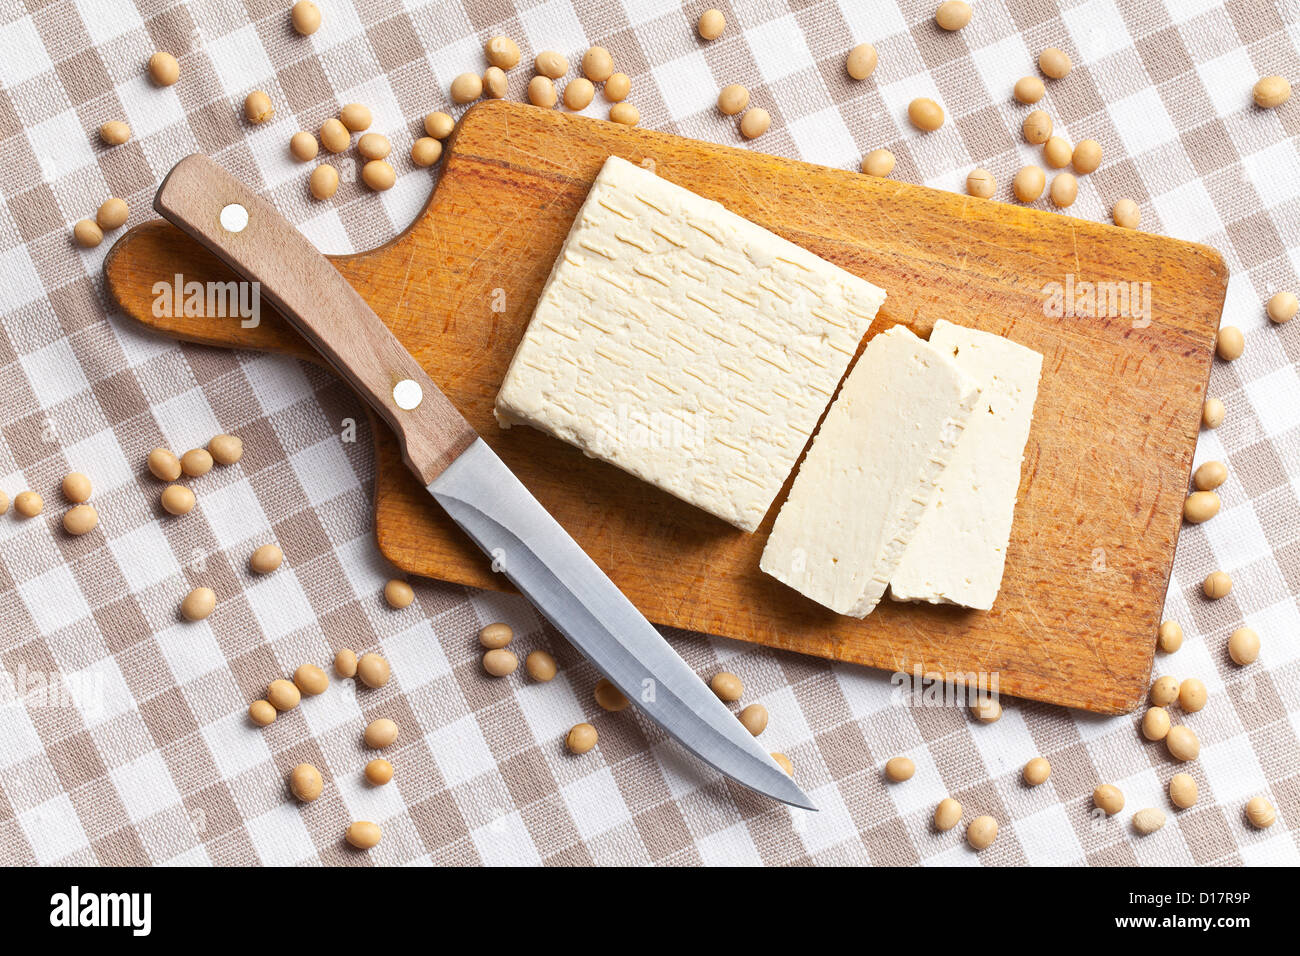 tofu and soy beans on kitchen table Stock Photo